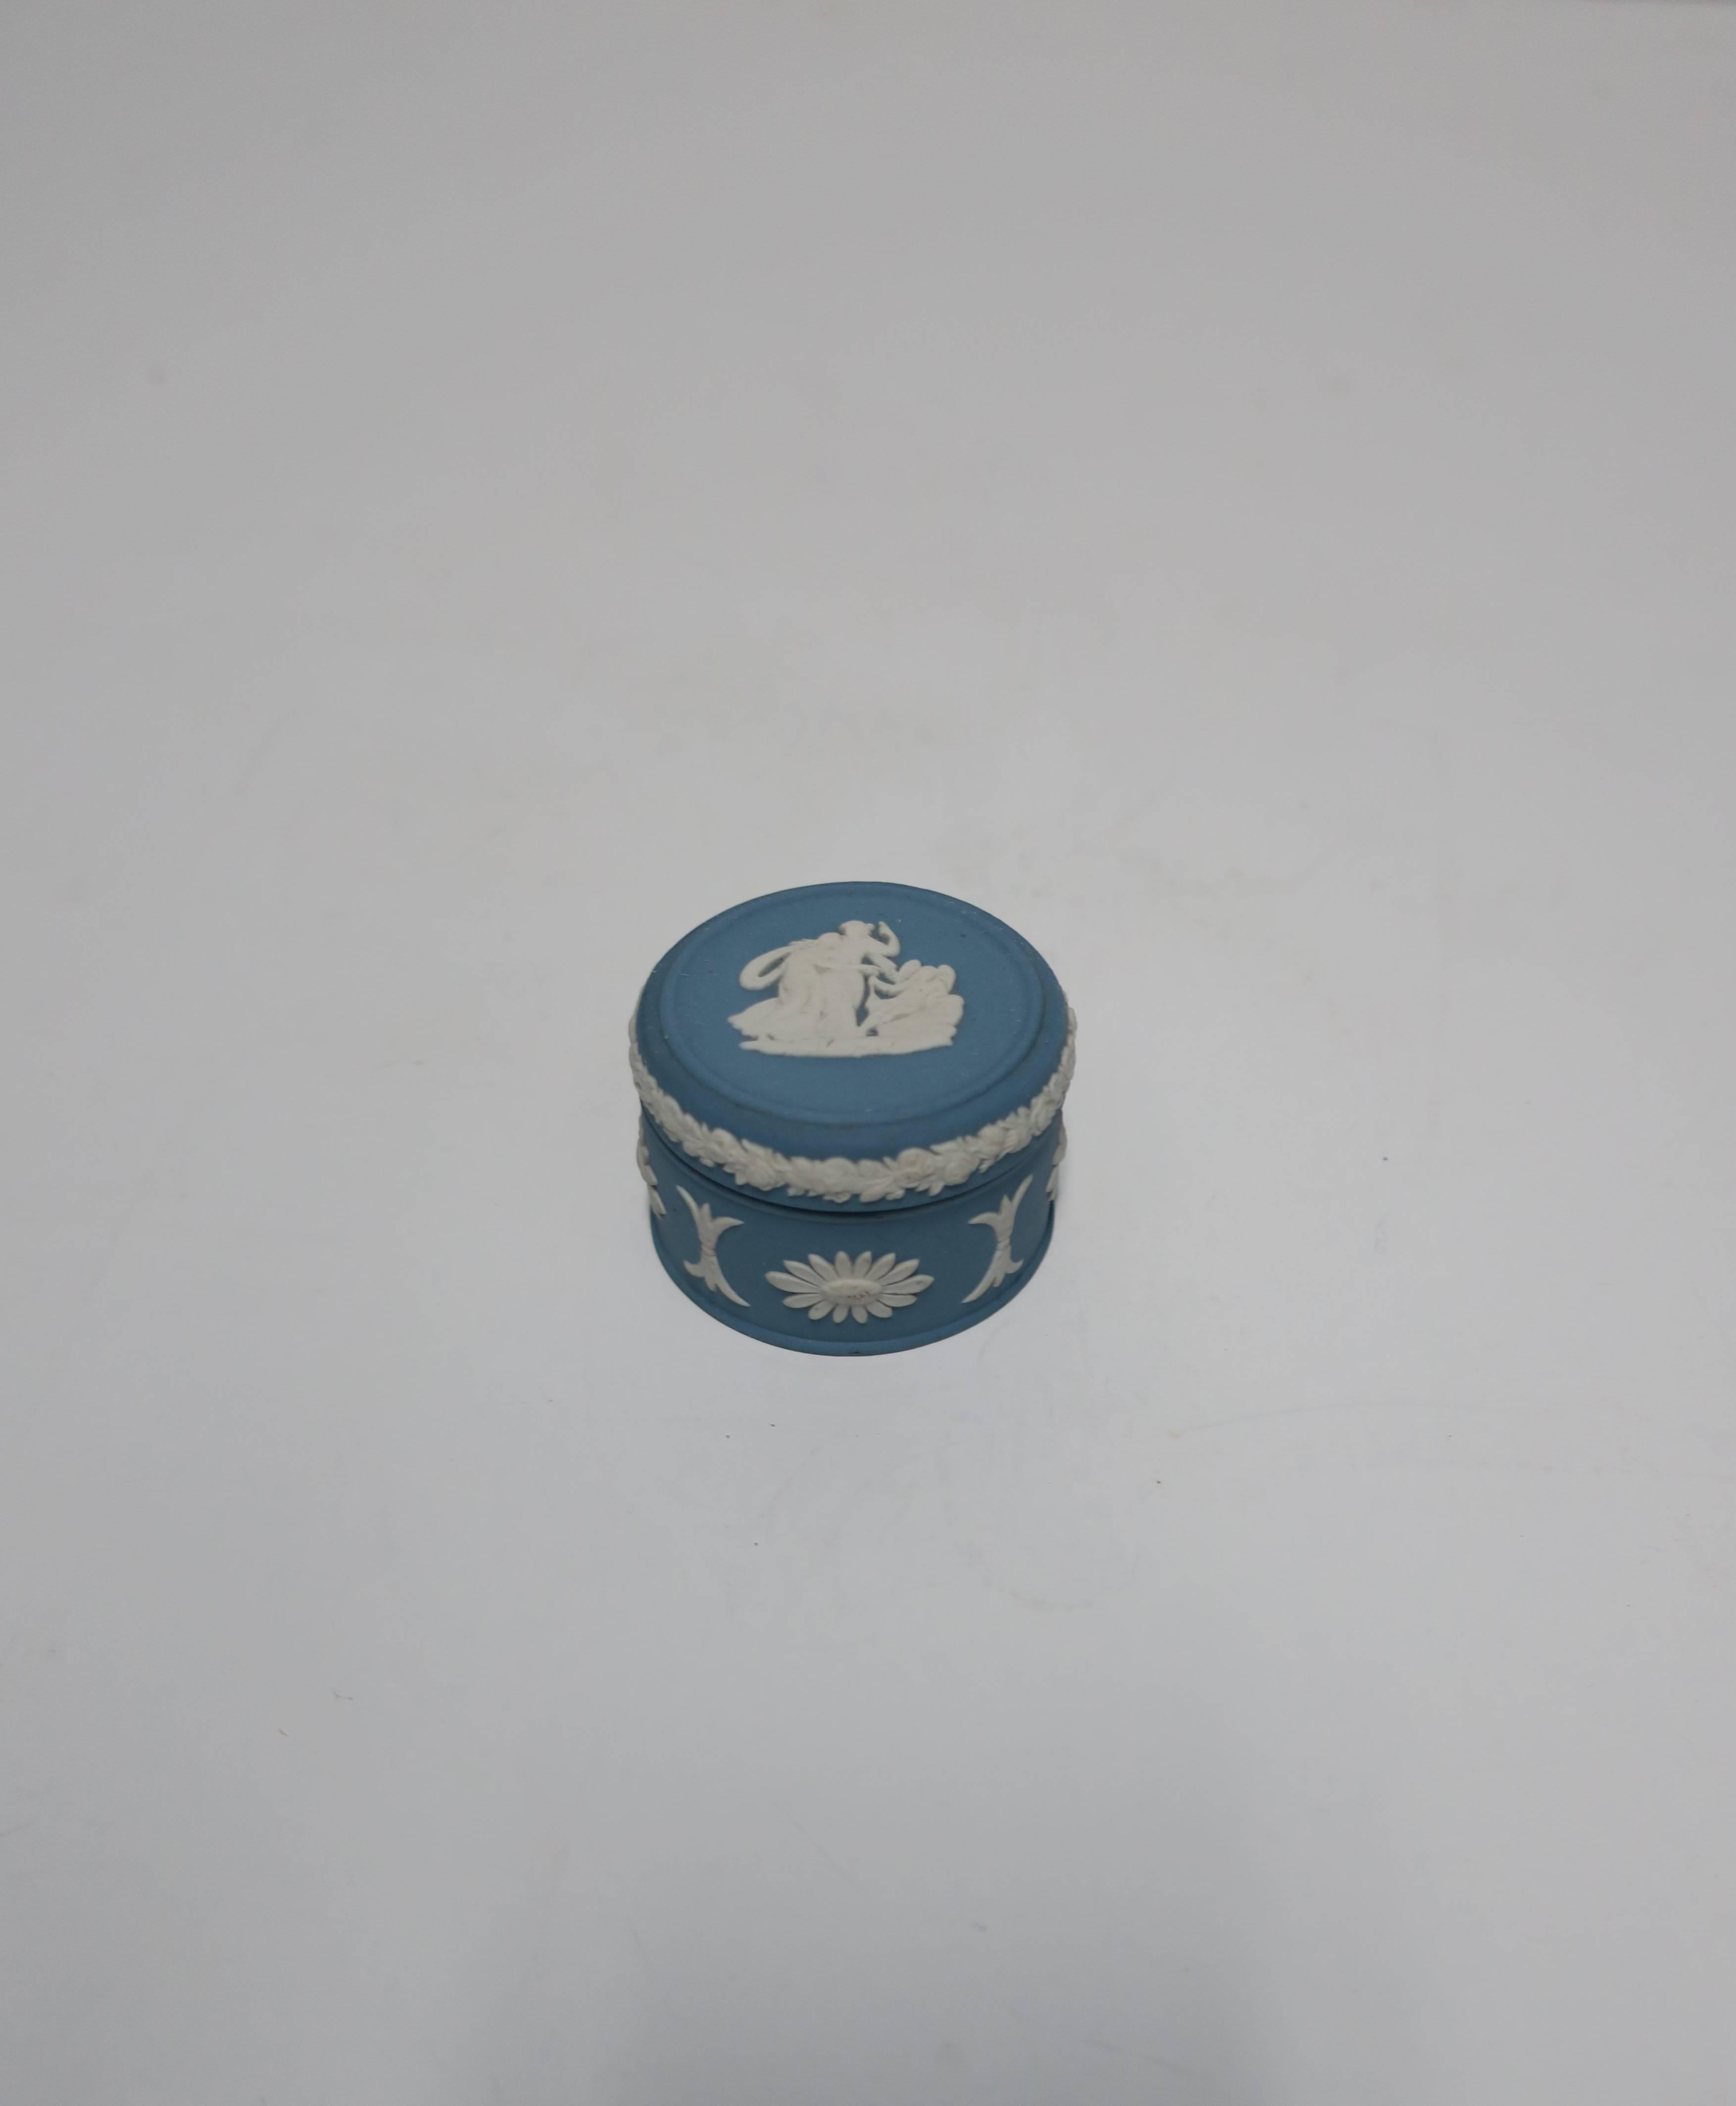 A beautiful petite Wedgwood Jasperware small round trinket or jewelry box. Box is a blue and white matte unglazed stoneware with raised relief around outside and on top. With maker's marks on bottom as show in image. Made in England.